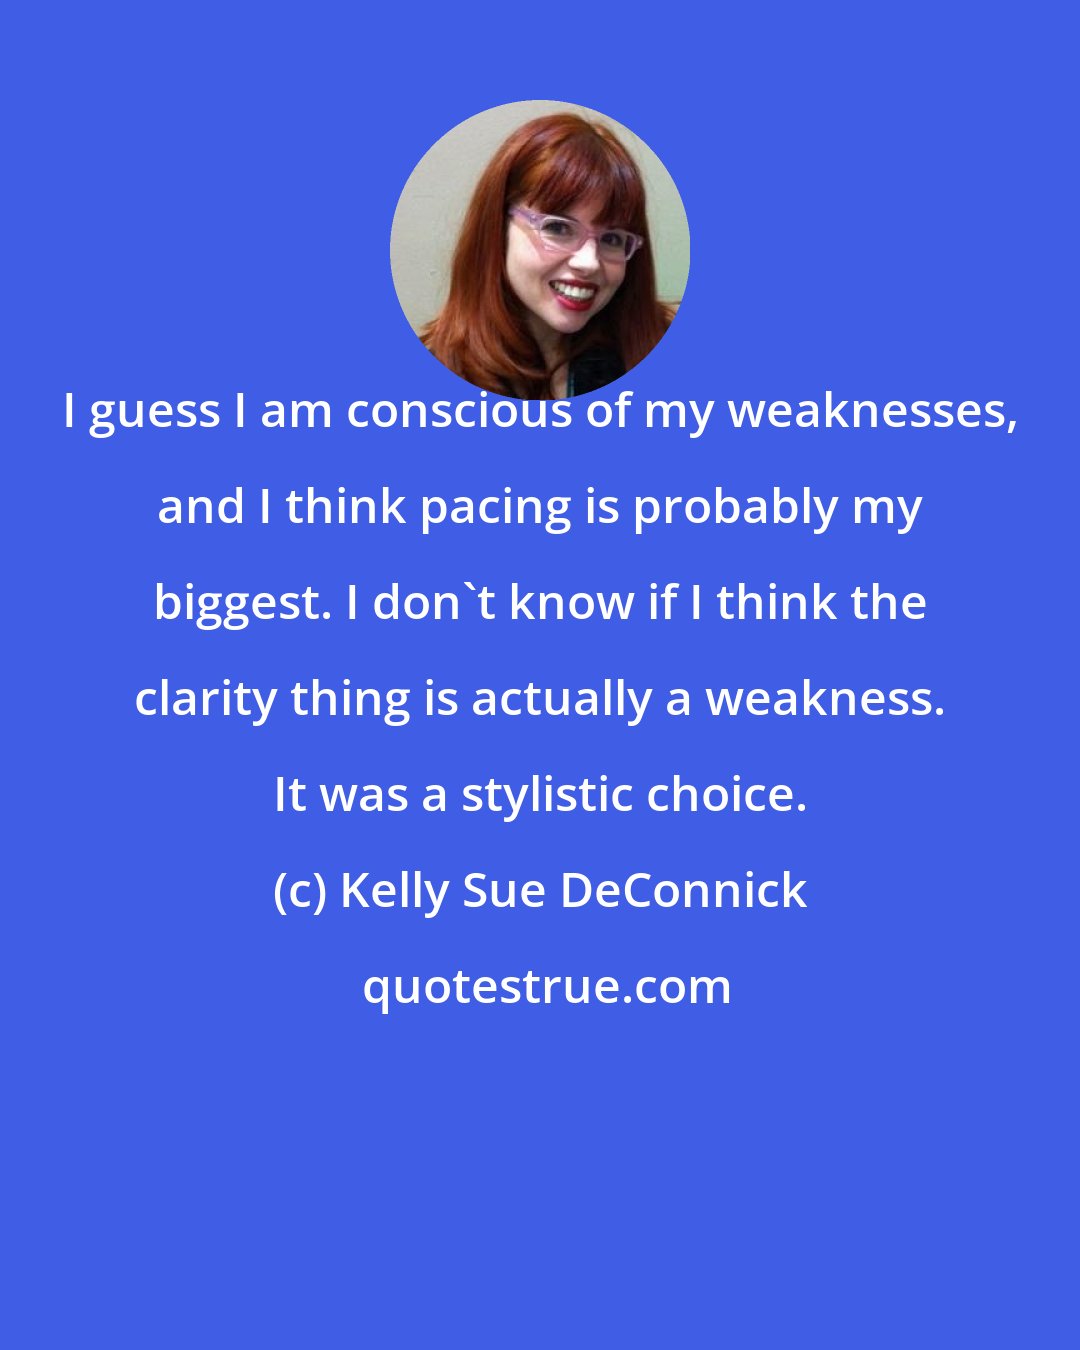 Kelly Sue DeConnick: I guess I am conscious of my weaknesses, and I think pacing is probably my biggest. I don't know if I think the clarity thing is actually a weakness. It was a stylistic choice.